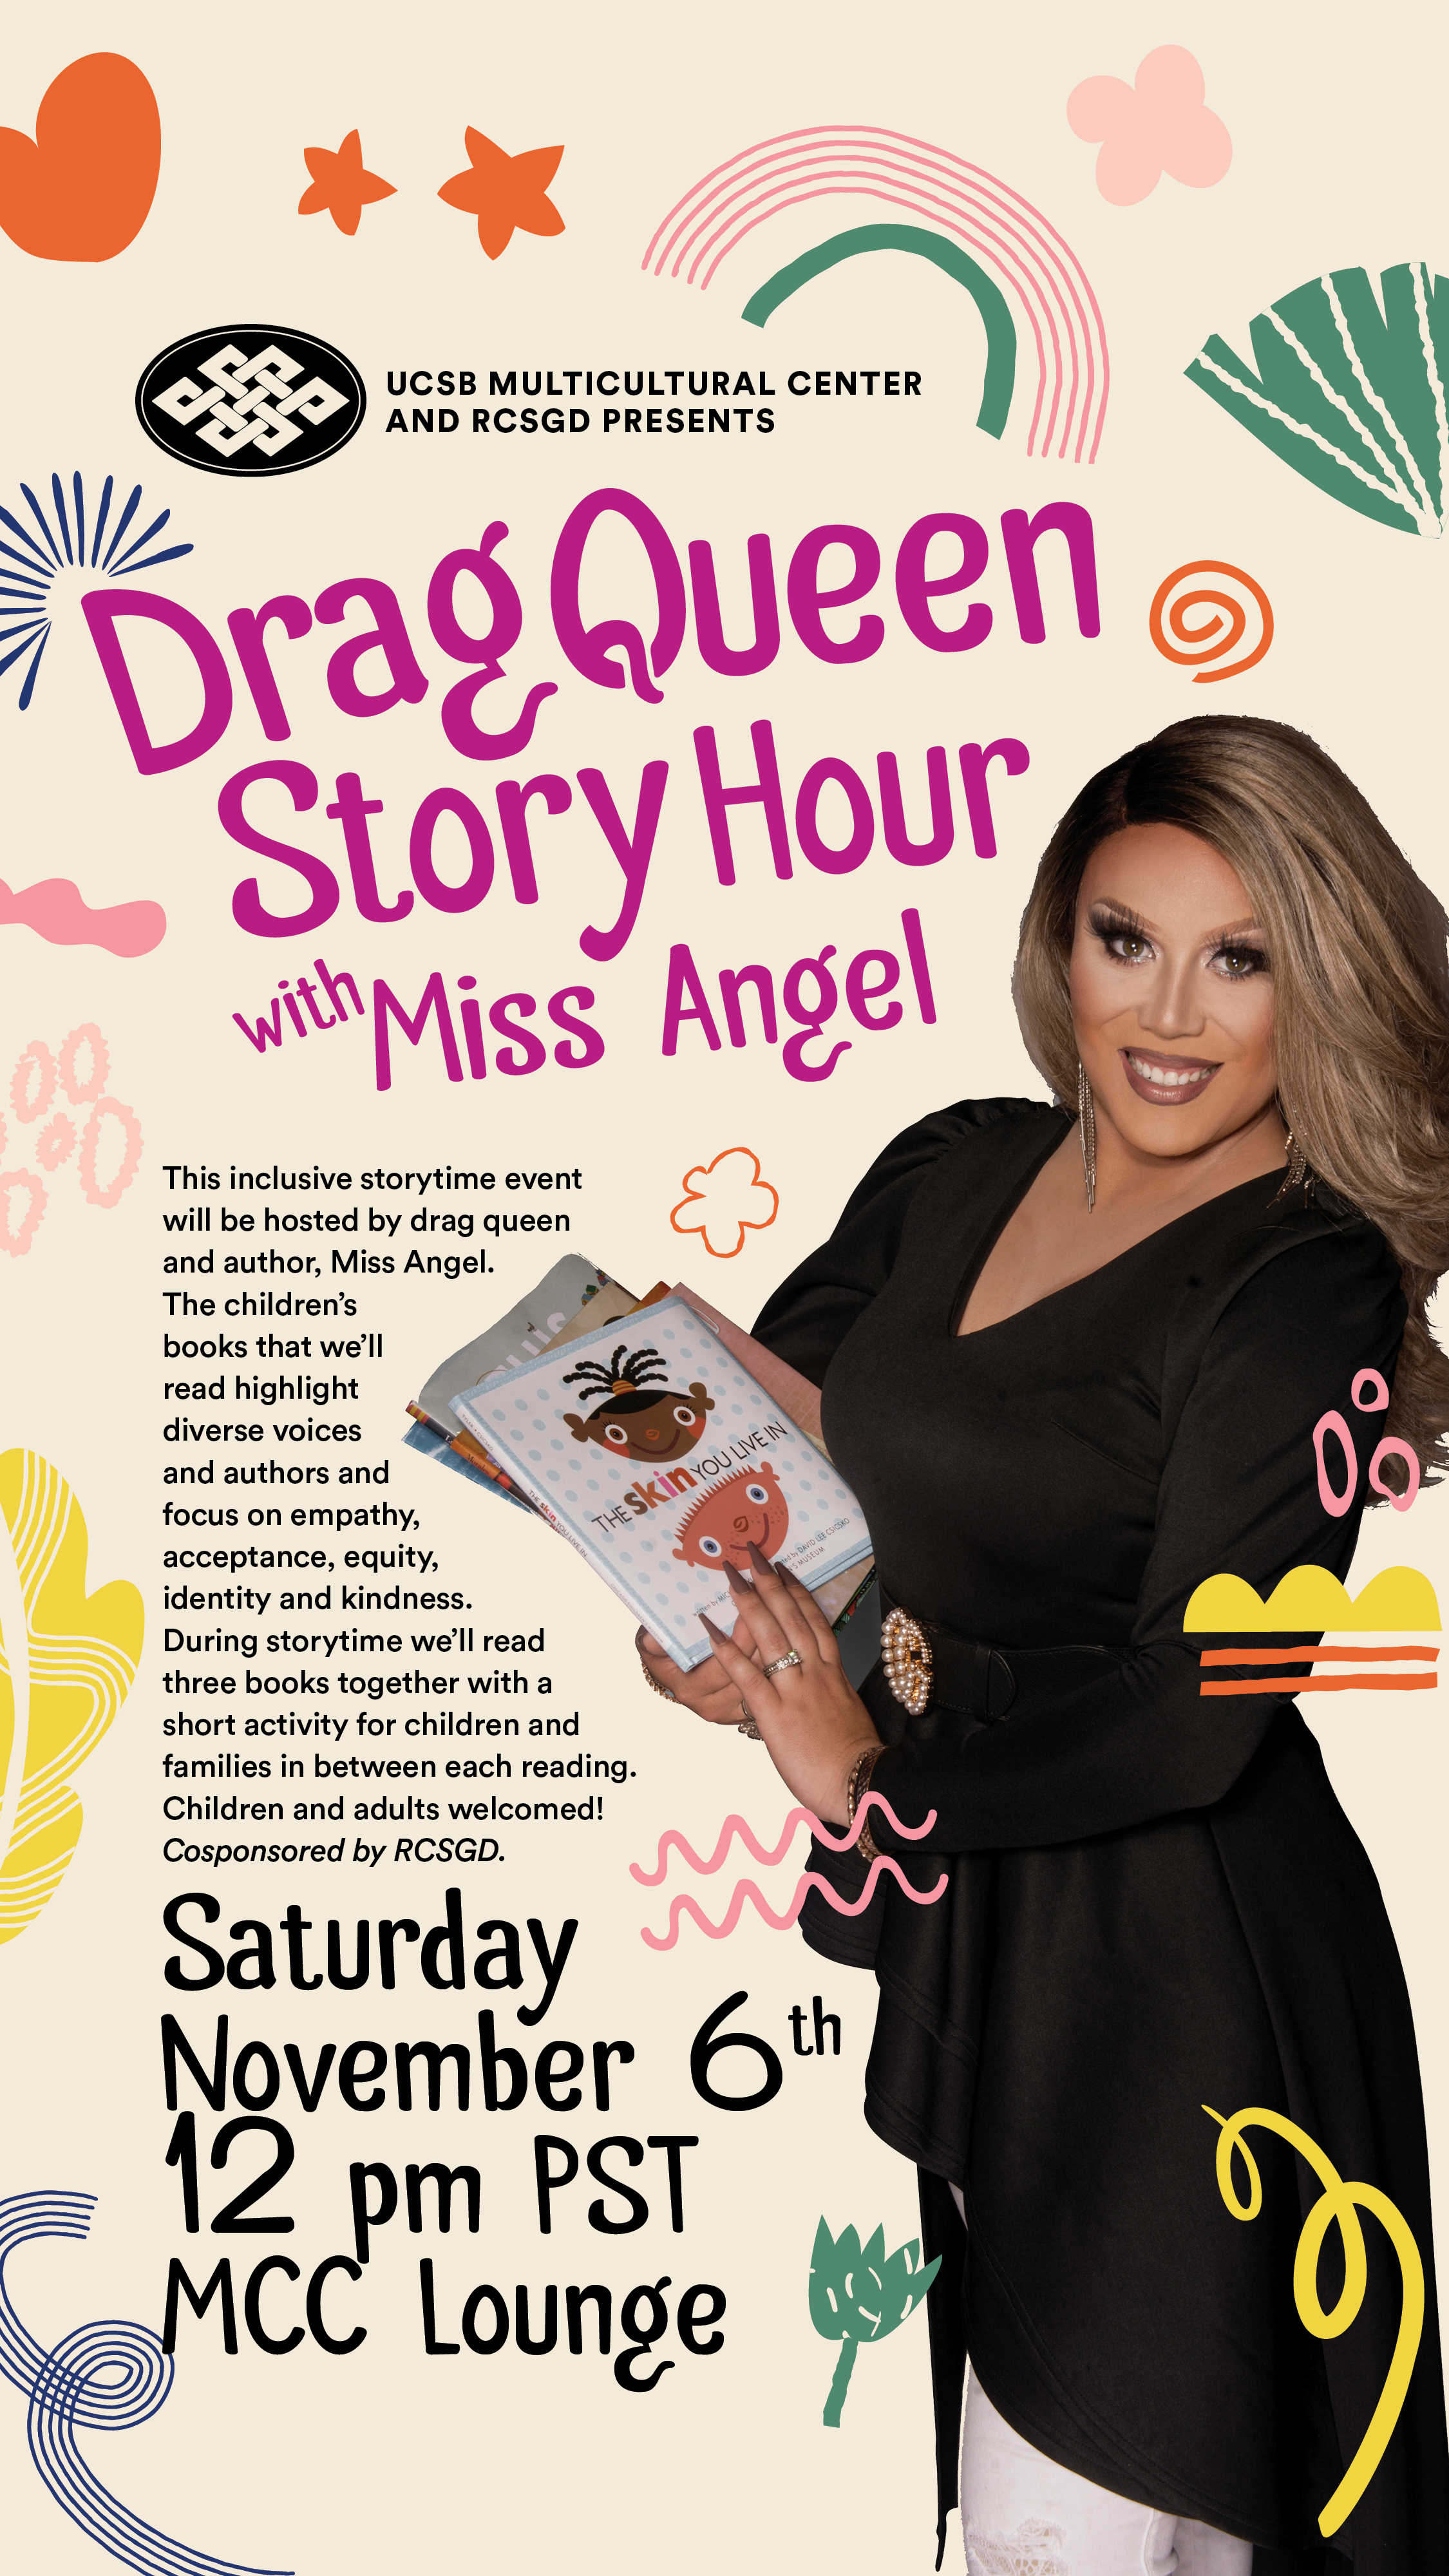 Drag Queen Story Hour with Miss Angel